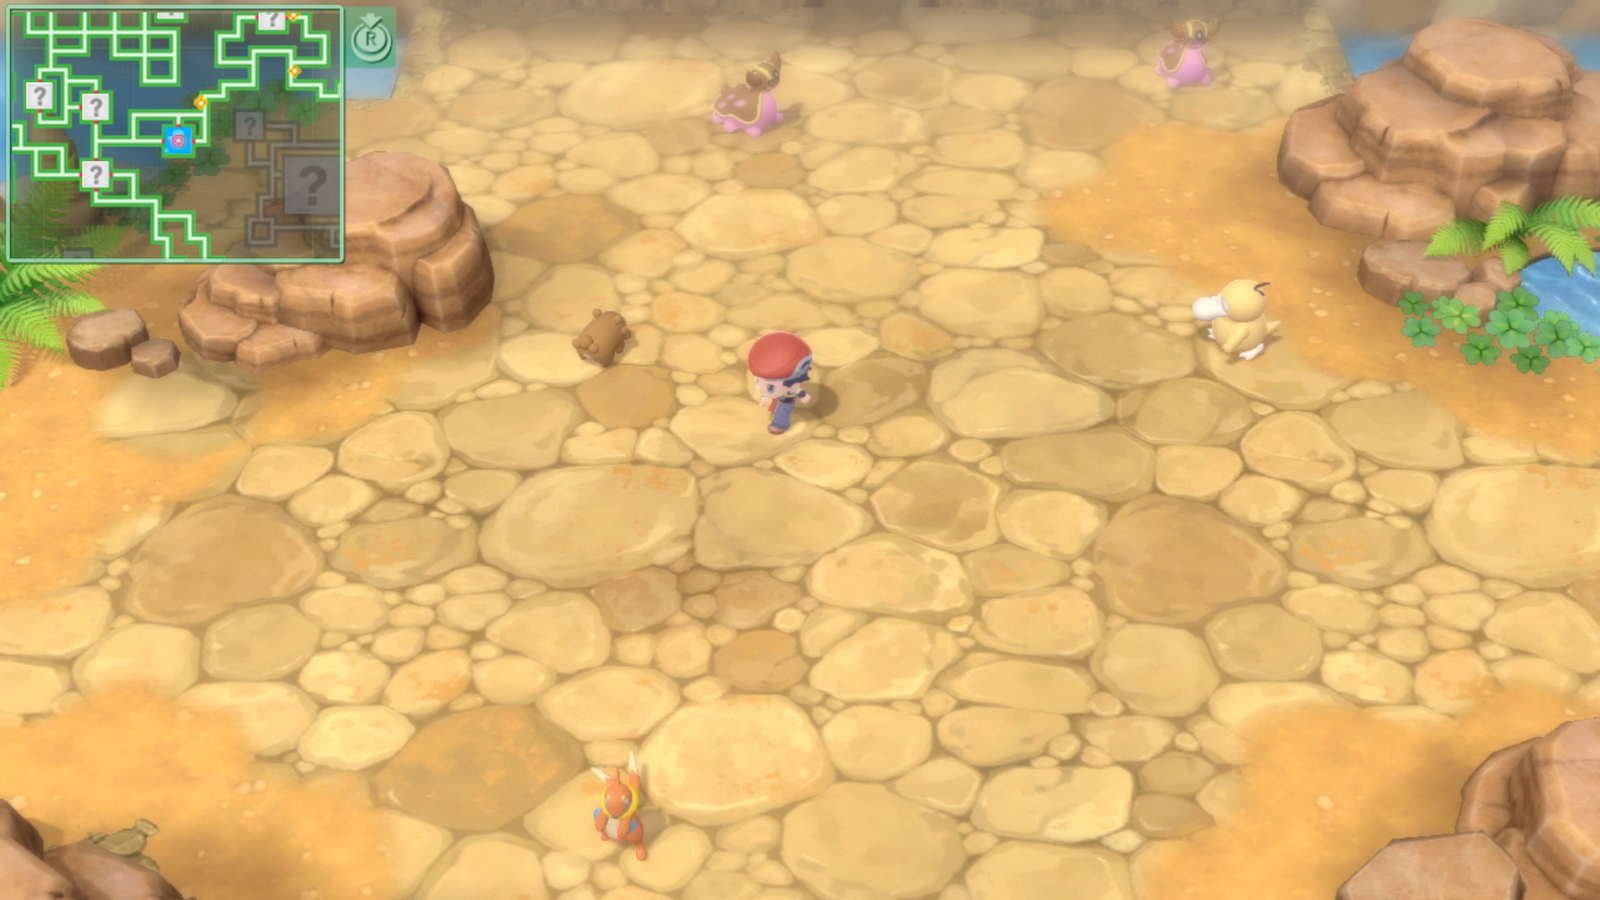 A Pokémon Trainer in the Pokémon Hideaways of the Grand Underground in Pokémon Brilliant Diamond and Shining Pearl. Nearby Pokémon that can be seen are Bidoof, Gastrodon, Psyduck, and Buizel.